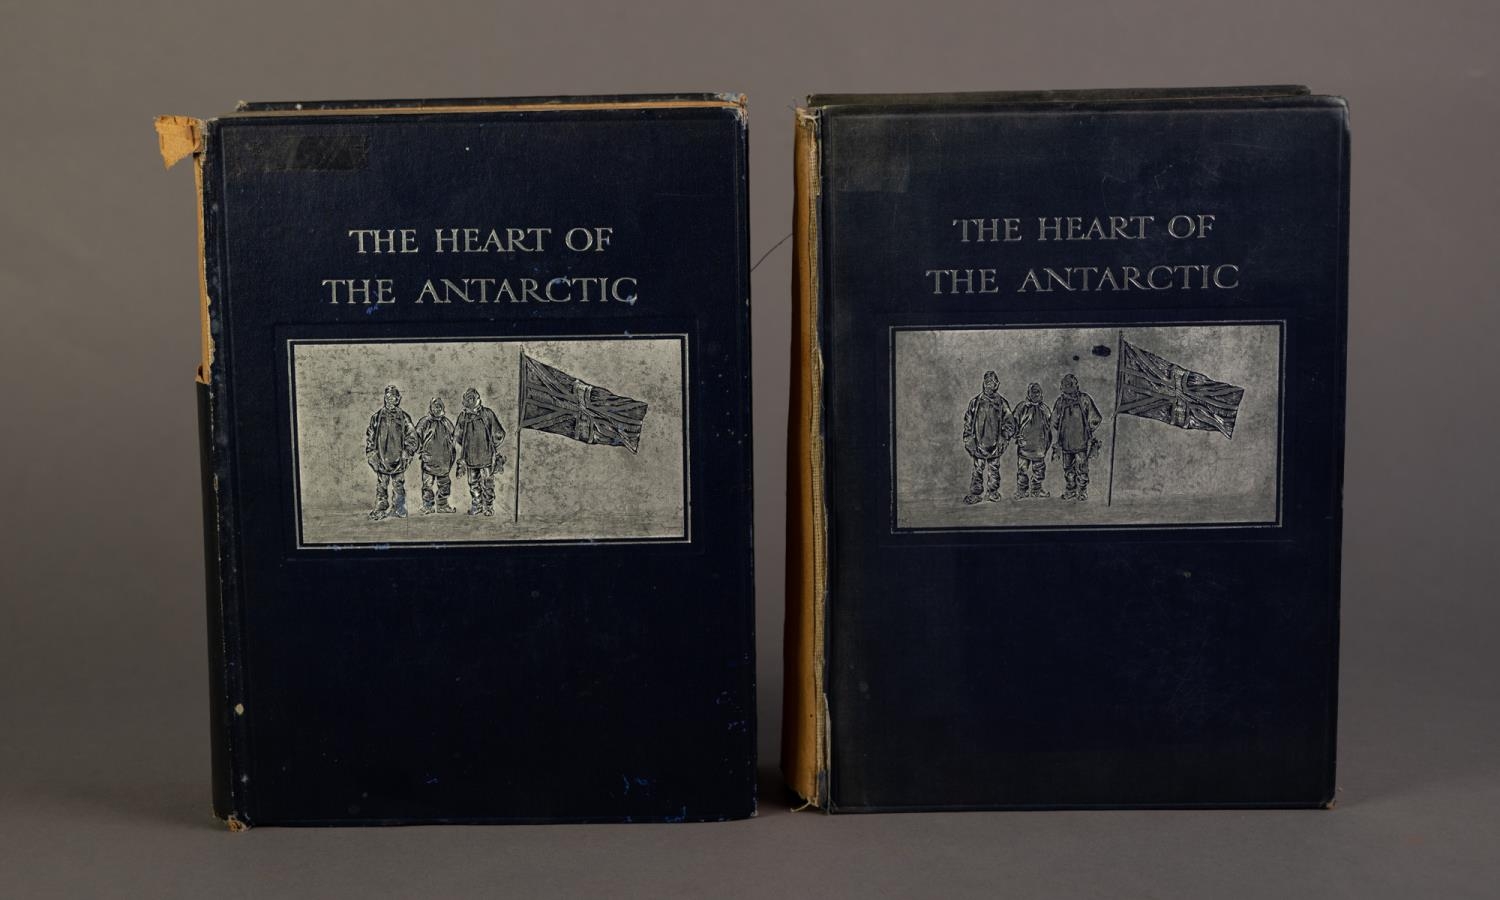 E H Shackleton- The Heart of the Antarctic, Being the Story of the British Antarctic Expedition